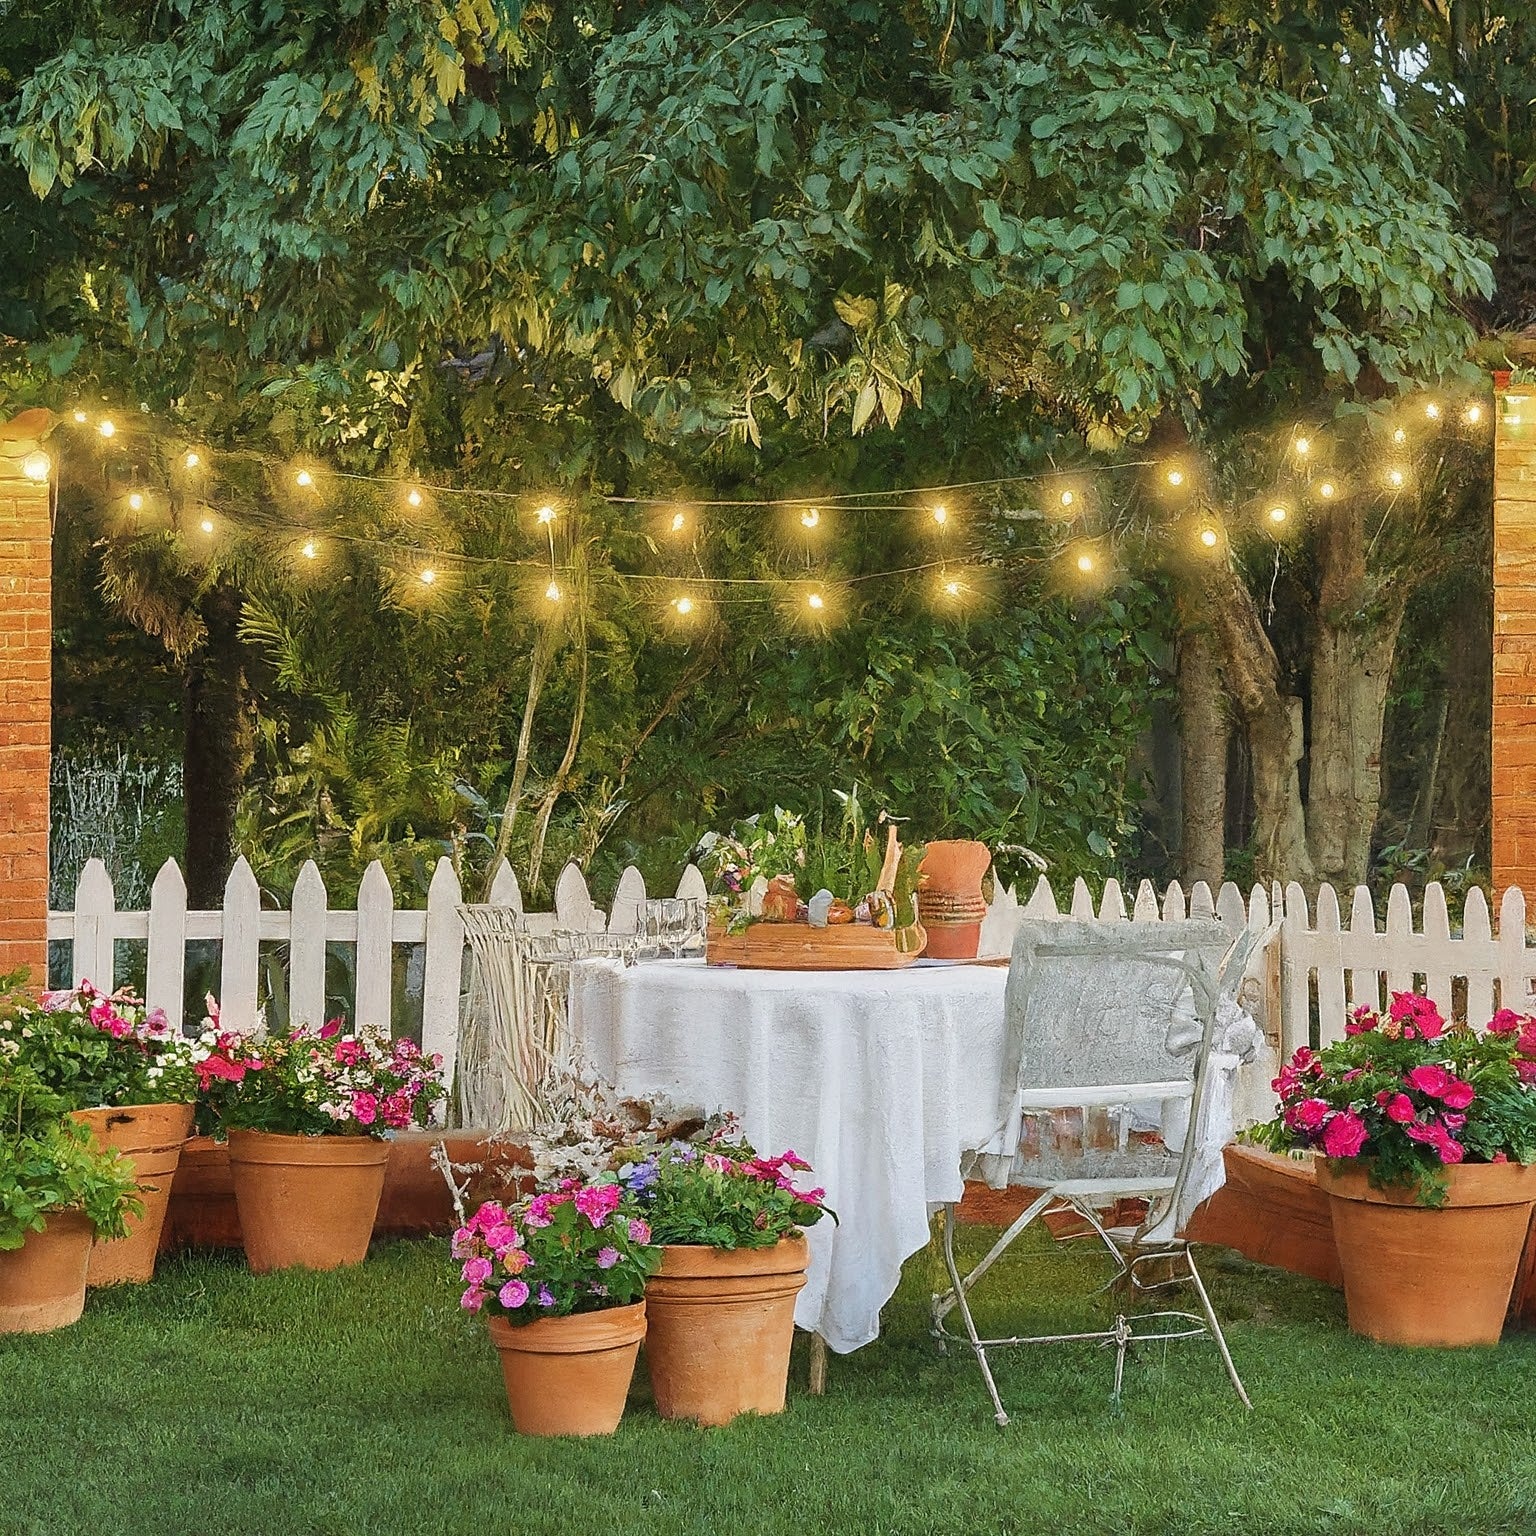 Outdoor Summer Decor Ideas To Impress Your Guests This Year